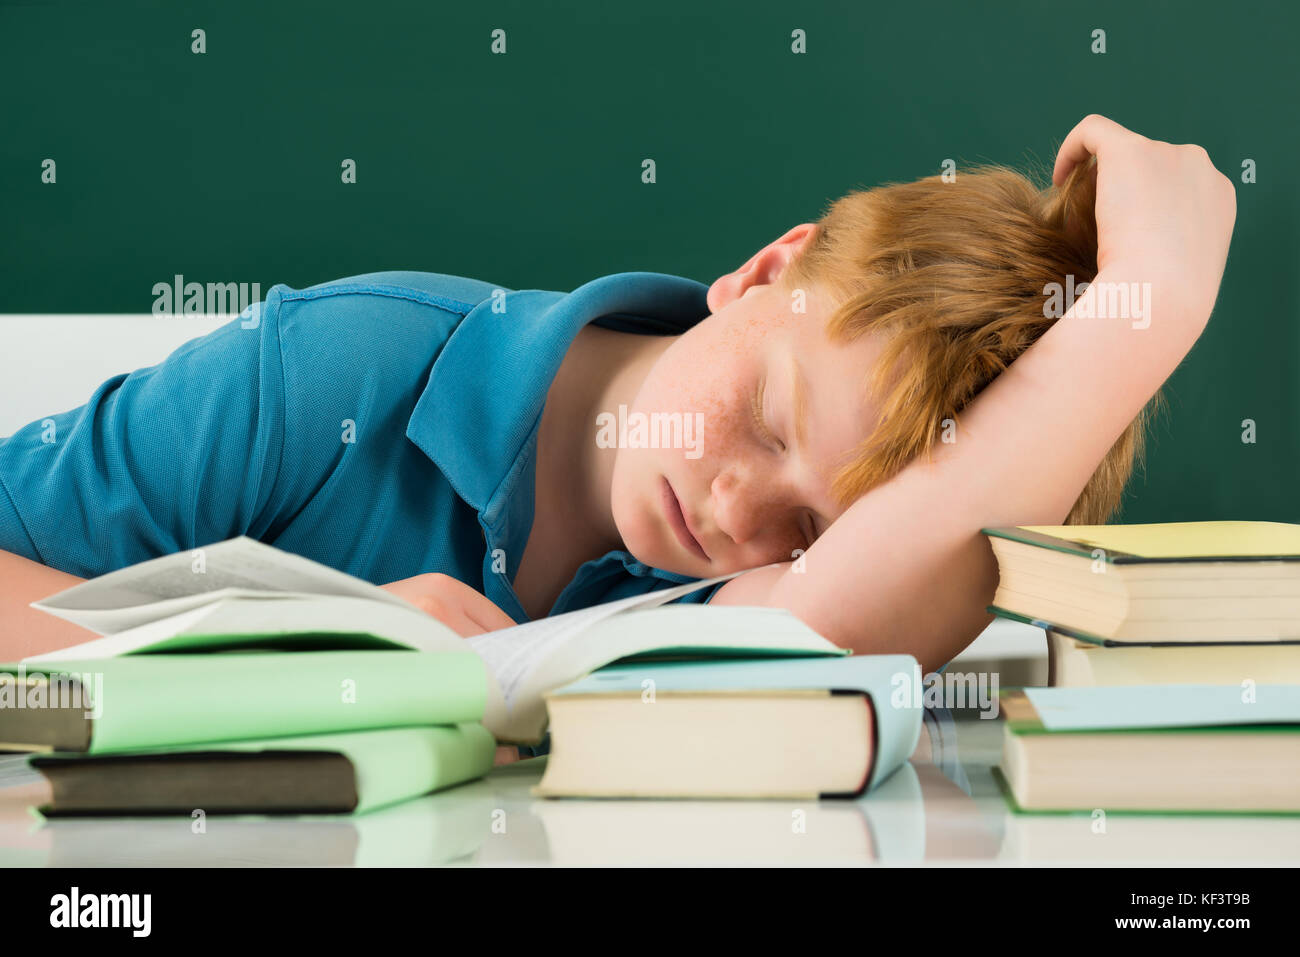 Boy Sleeping In Classroom With Books On Desk Stock Photo